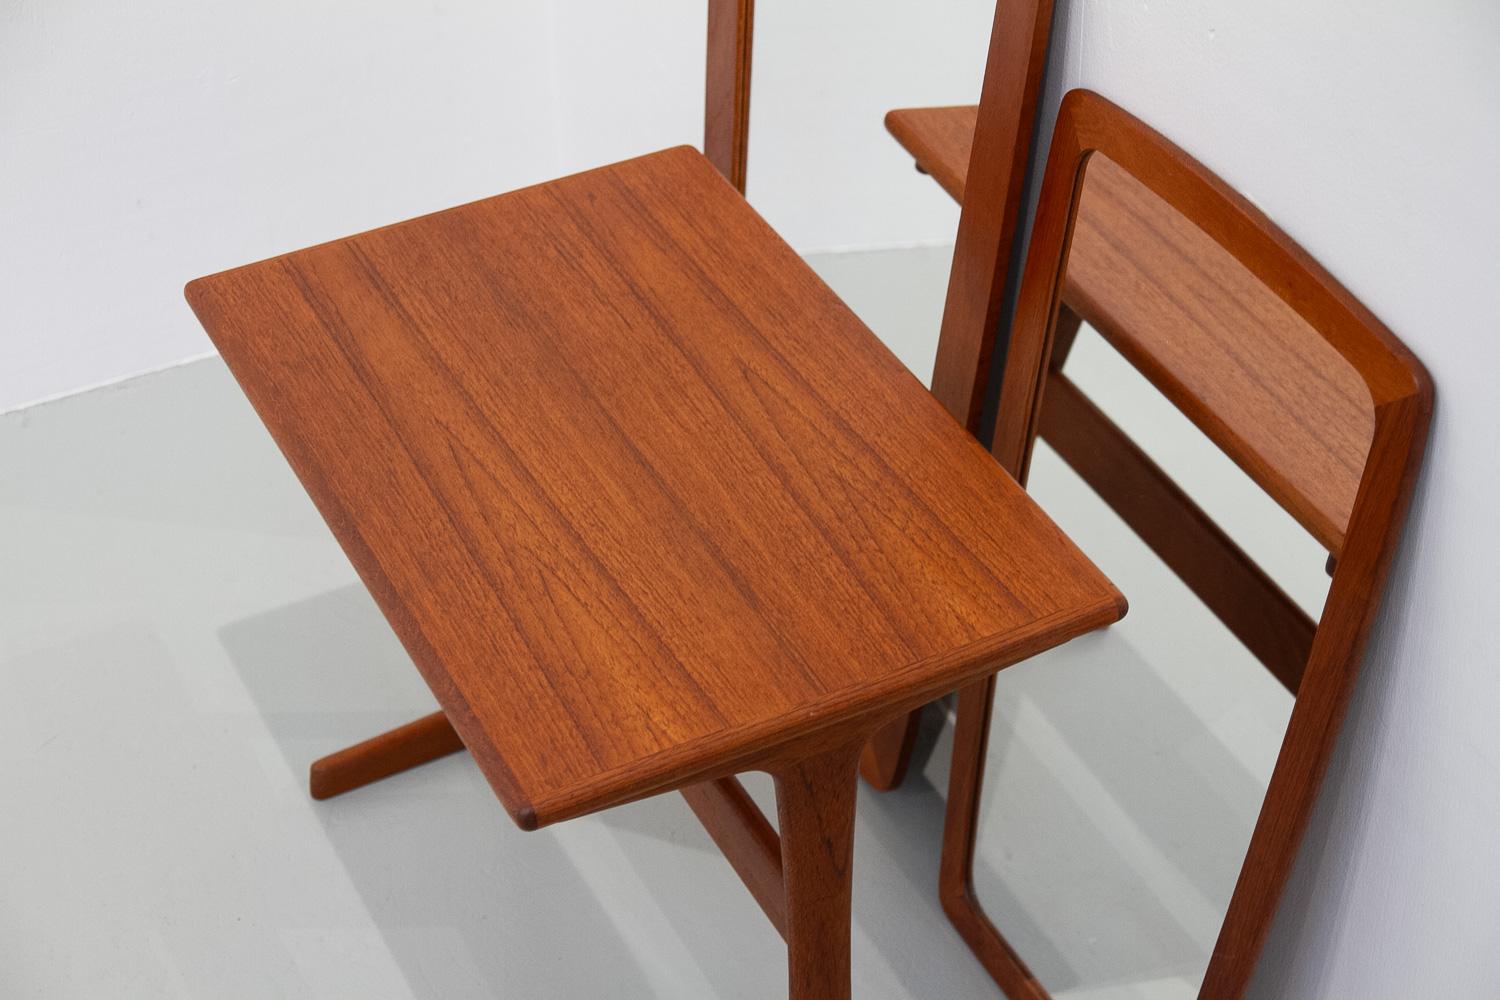 Mid-20th Century Danish Modern Teak Mirrors and Table, 1960s. Set of 3. For Sale